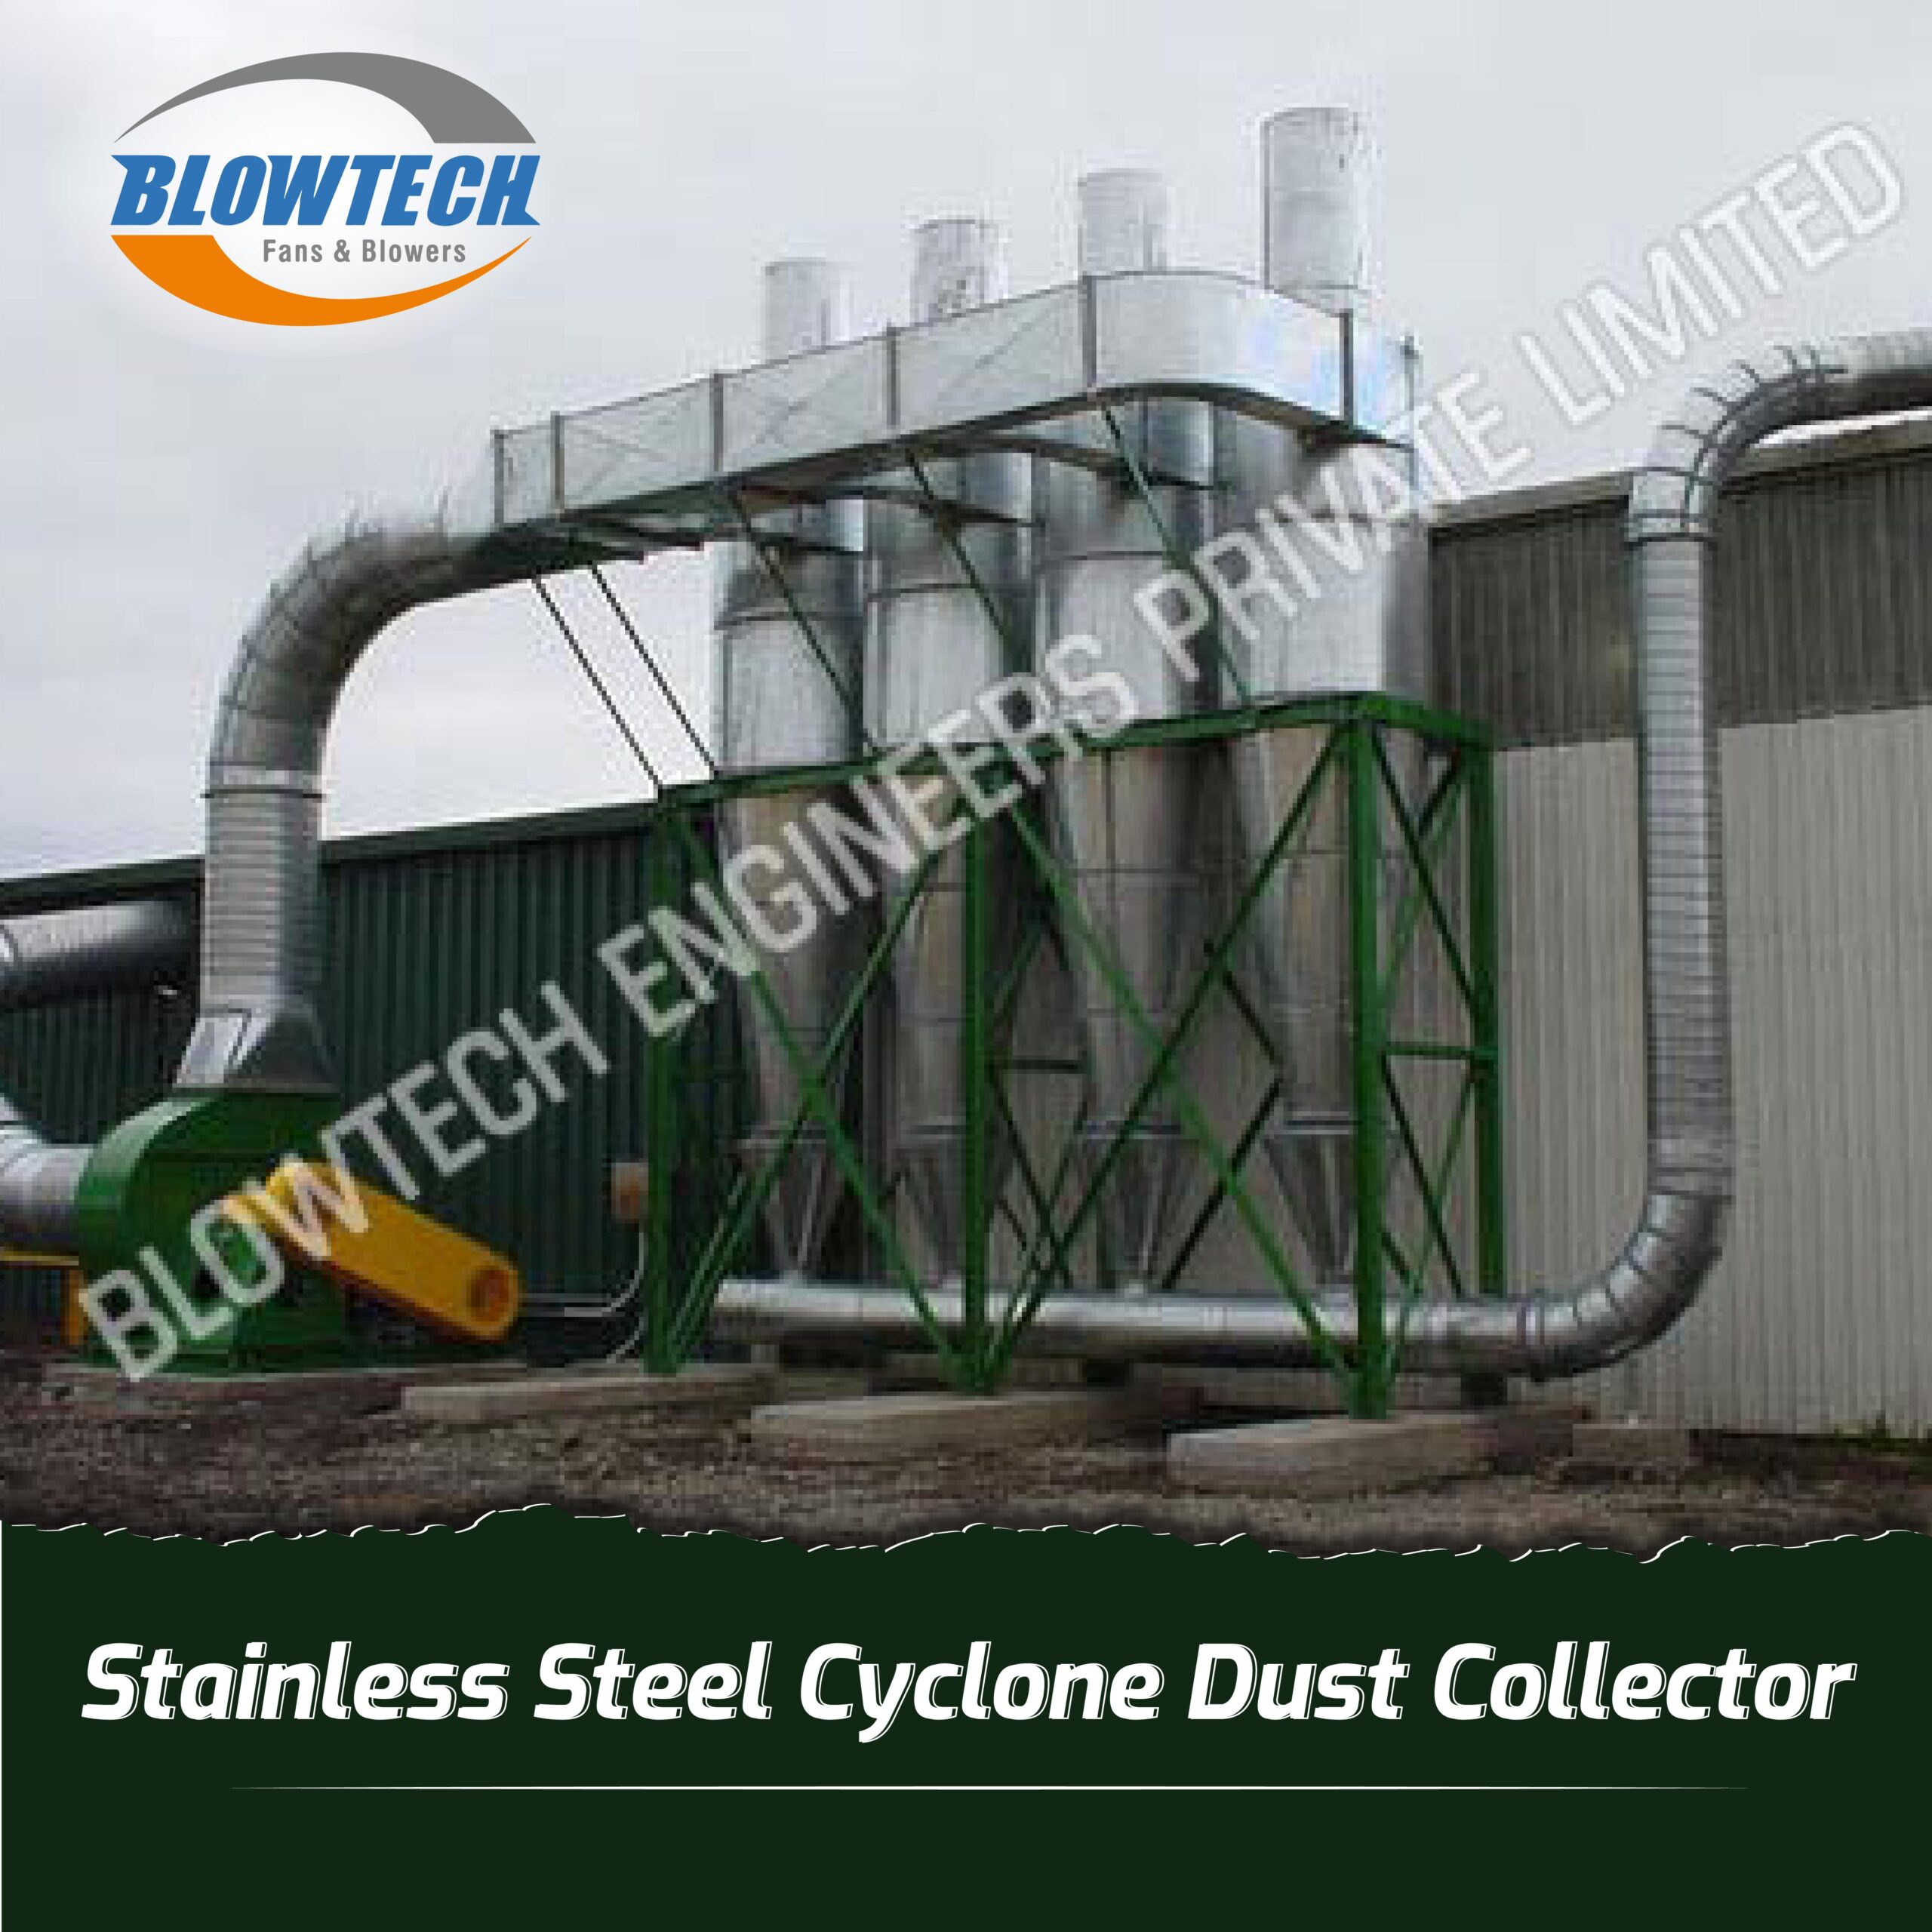 Stainless Steel Cyclone Dust Collector  manufacturer, supplier and exporter in Mumbai, India